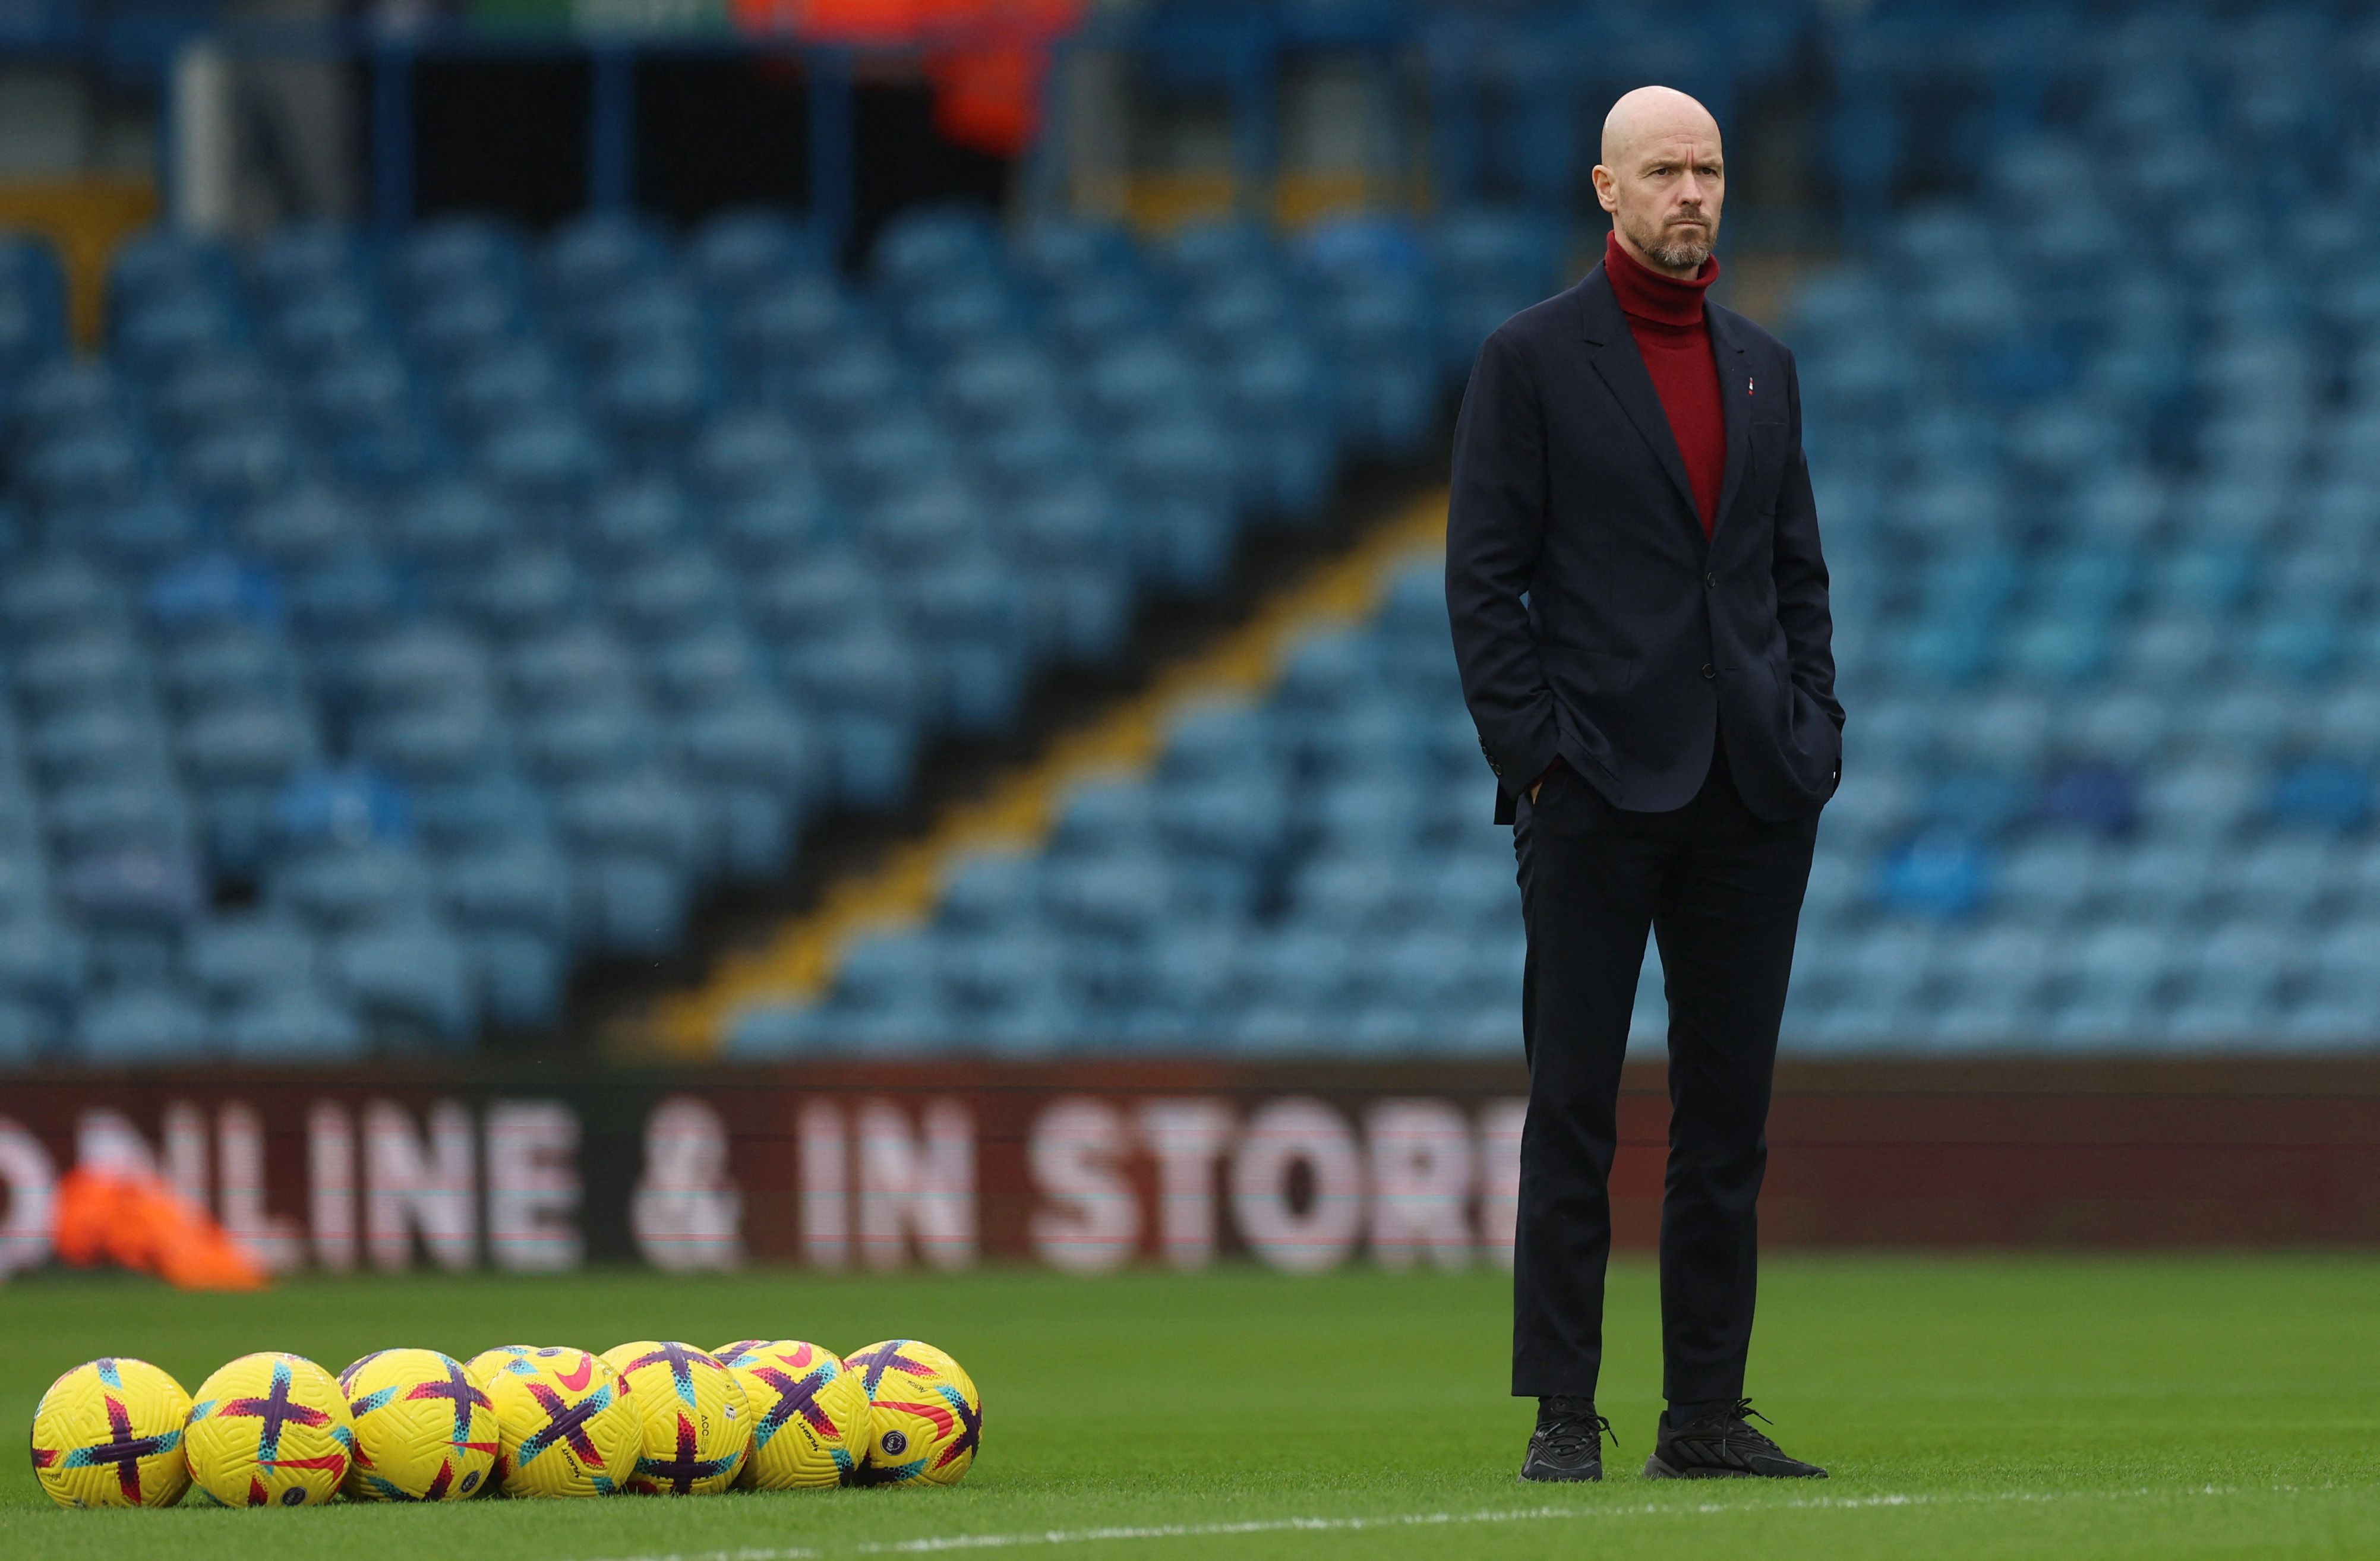 Manchester United manager Erik ten Hag on the pitch before match